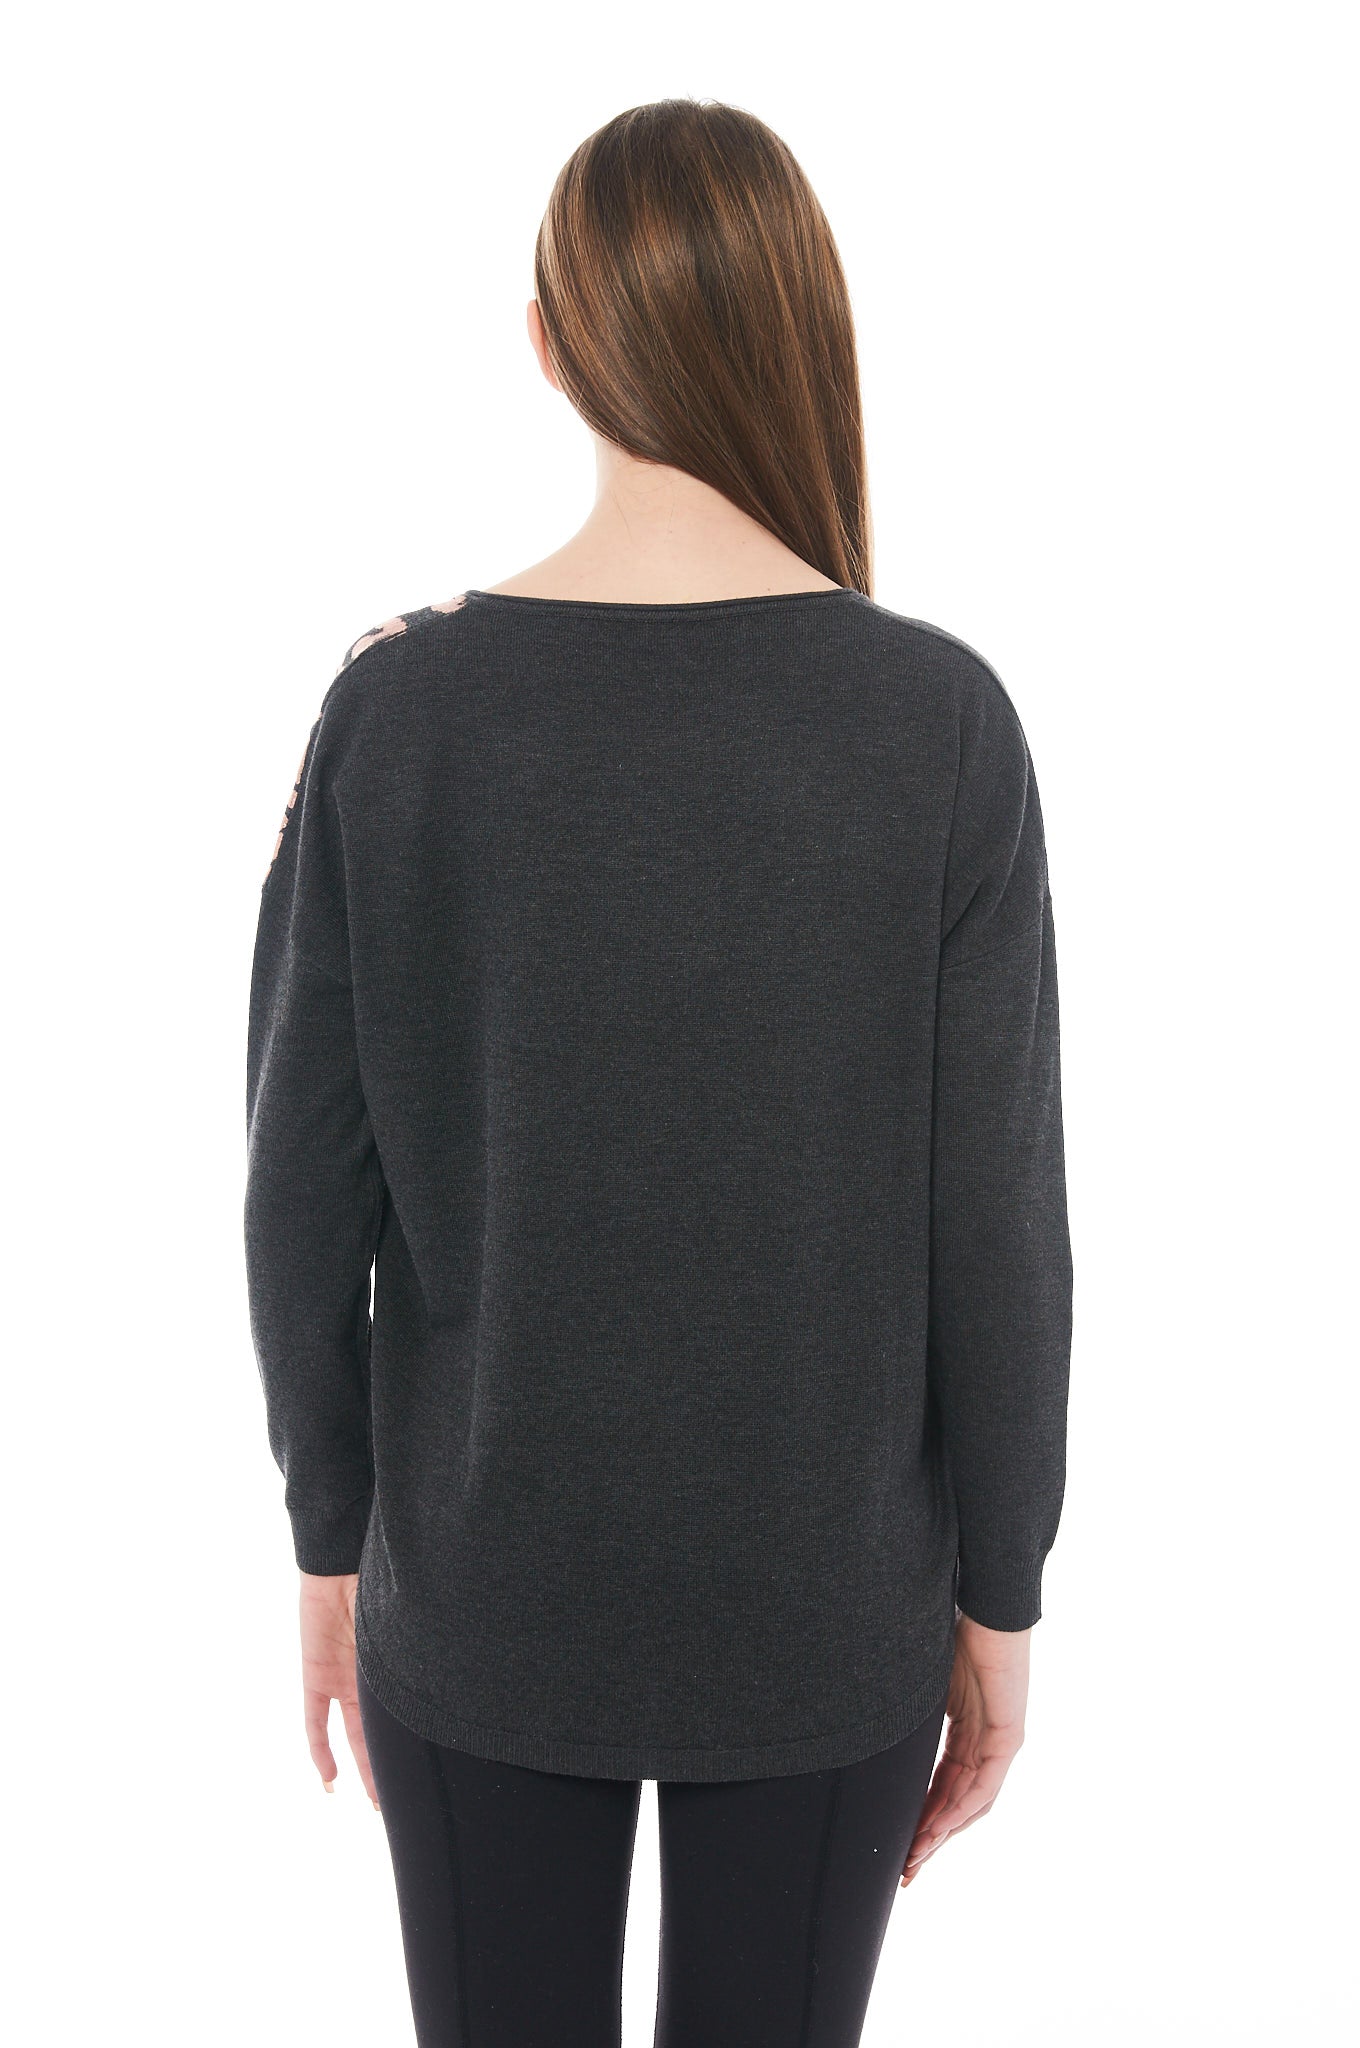 THE DONE AND DUSTED SWEATER IN GRIMY GREY